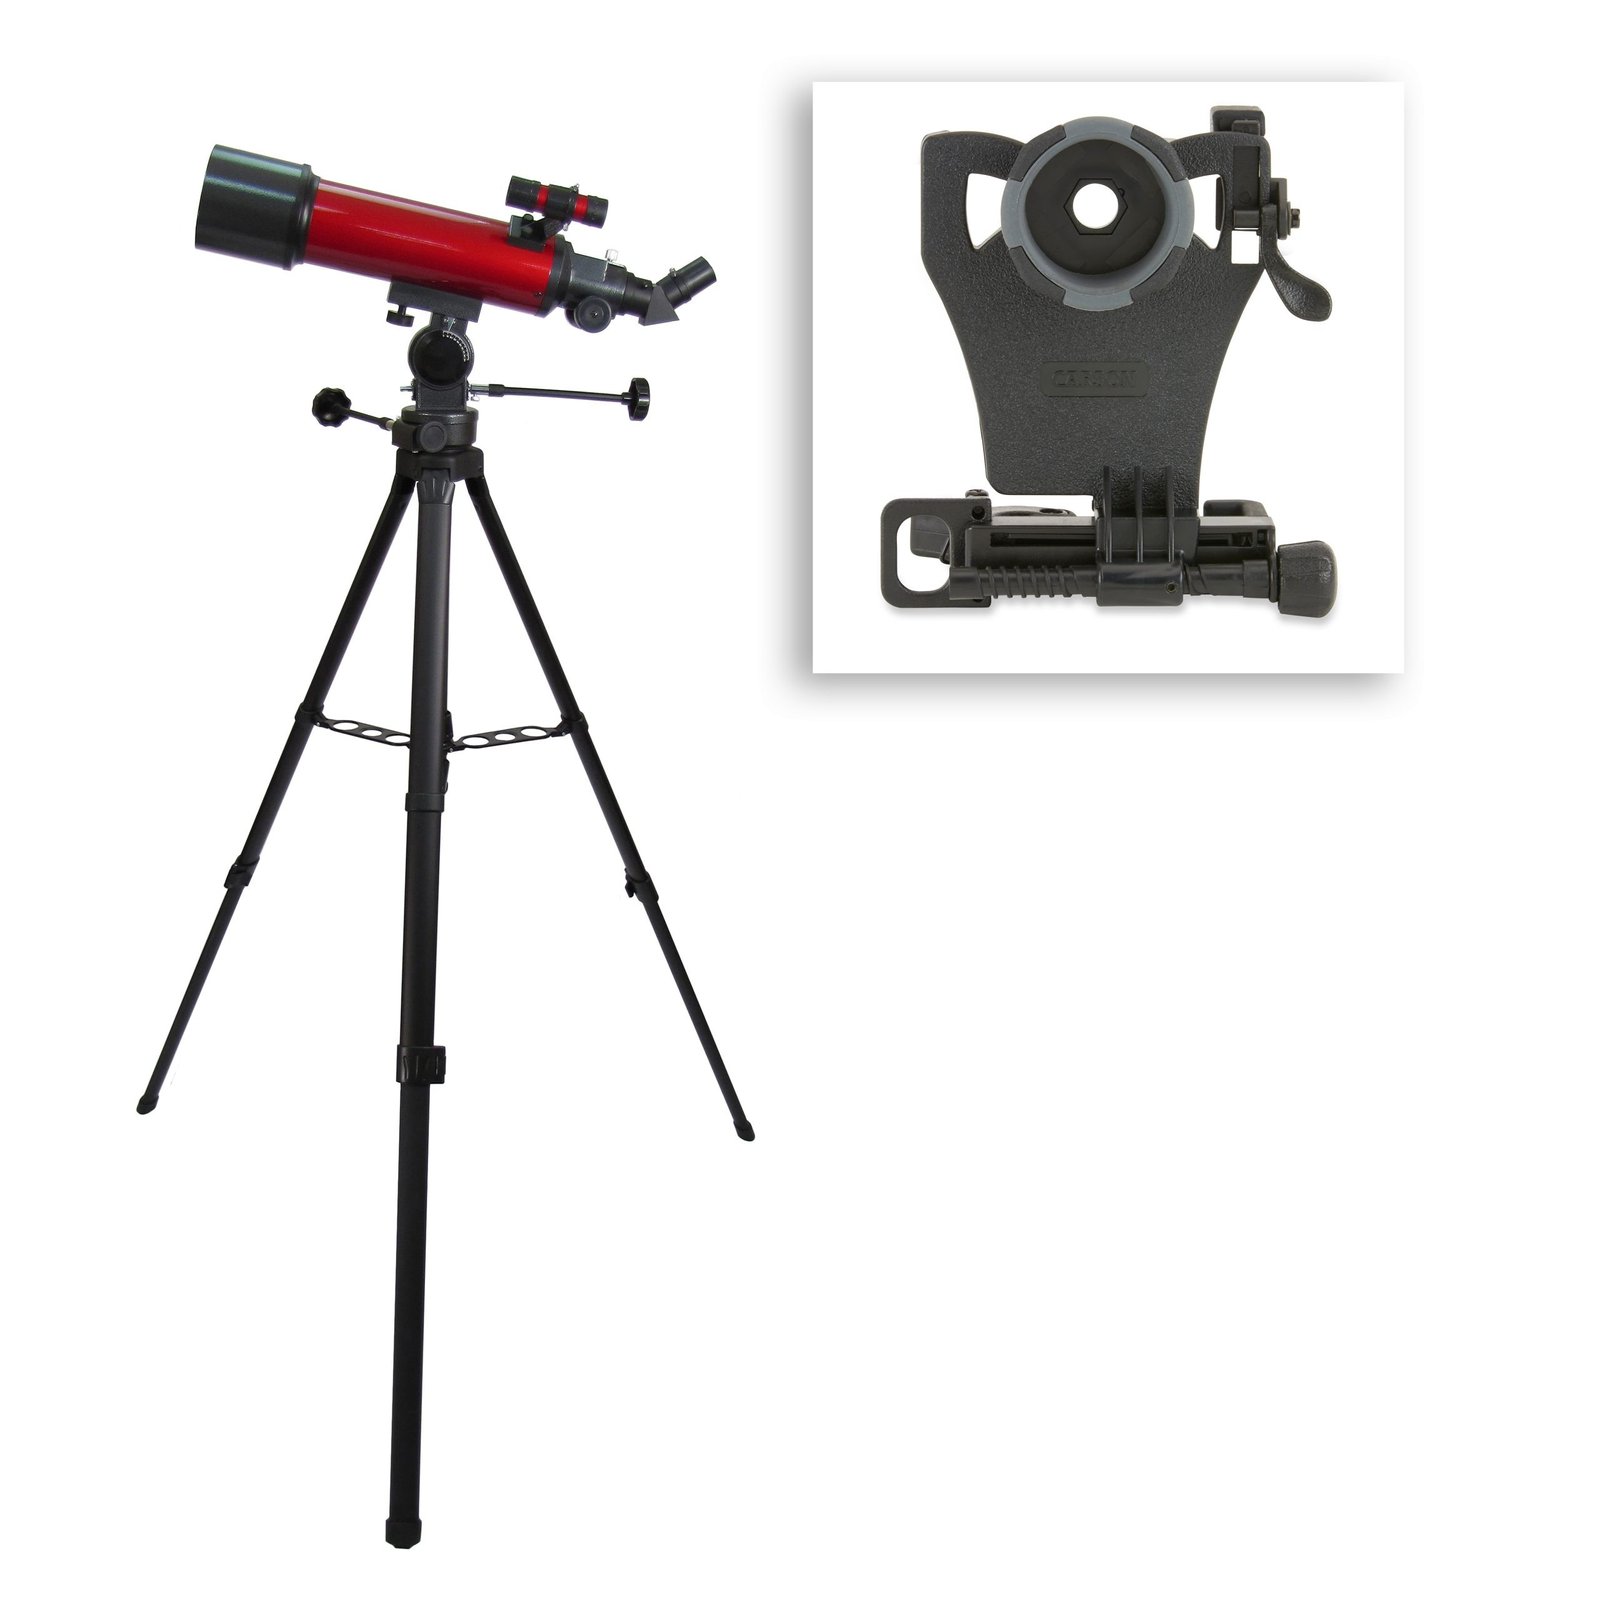 Carson Red Planet Adapter Telescope, Universal Refractor Smartphone – Digiscoping Series TheRealOptics 25-56x80mm